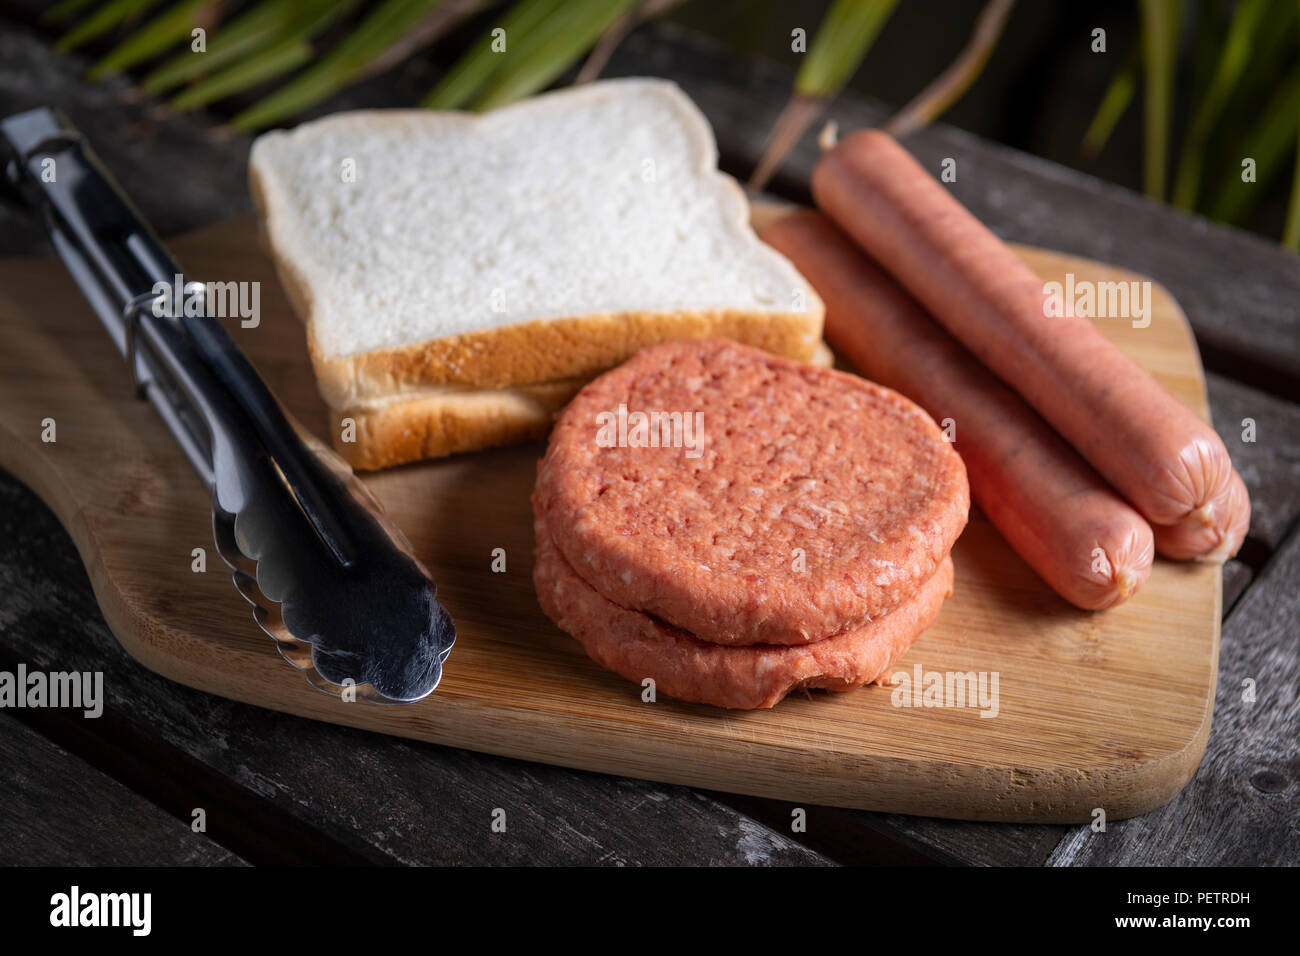 Fresh uncooked barbecue sausages, burgers and bread ready to be grilled, on wooden chopping board Stock Photo